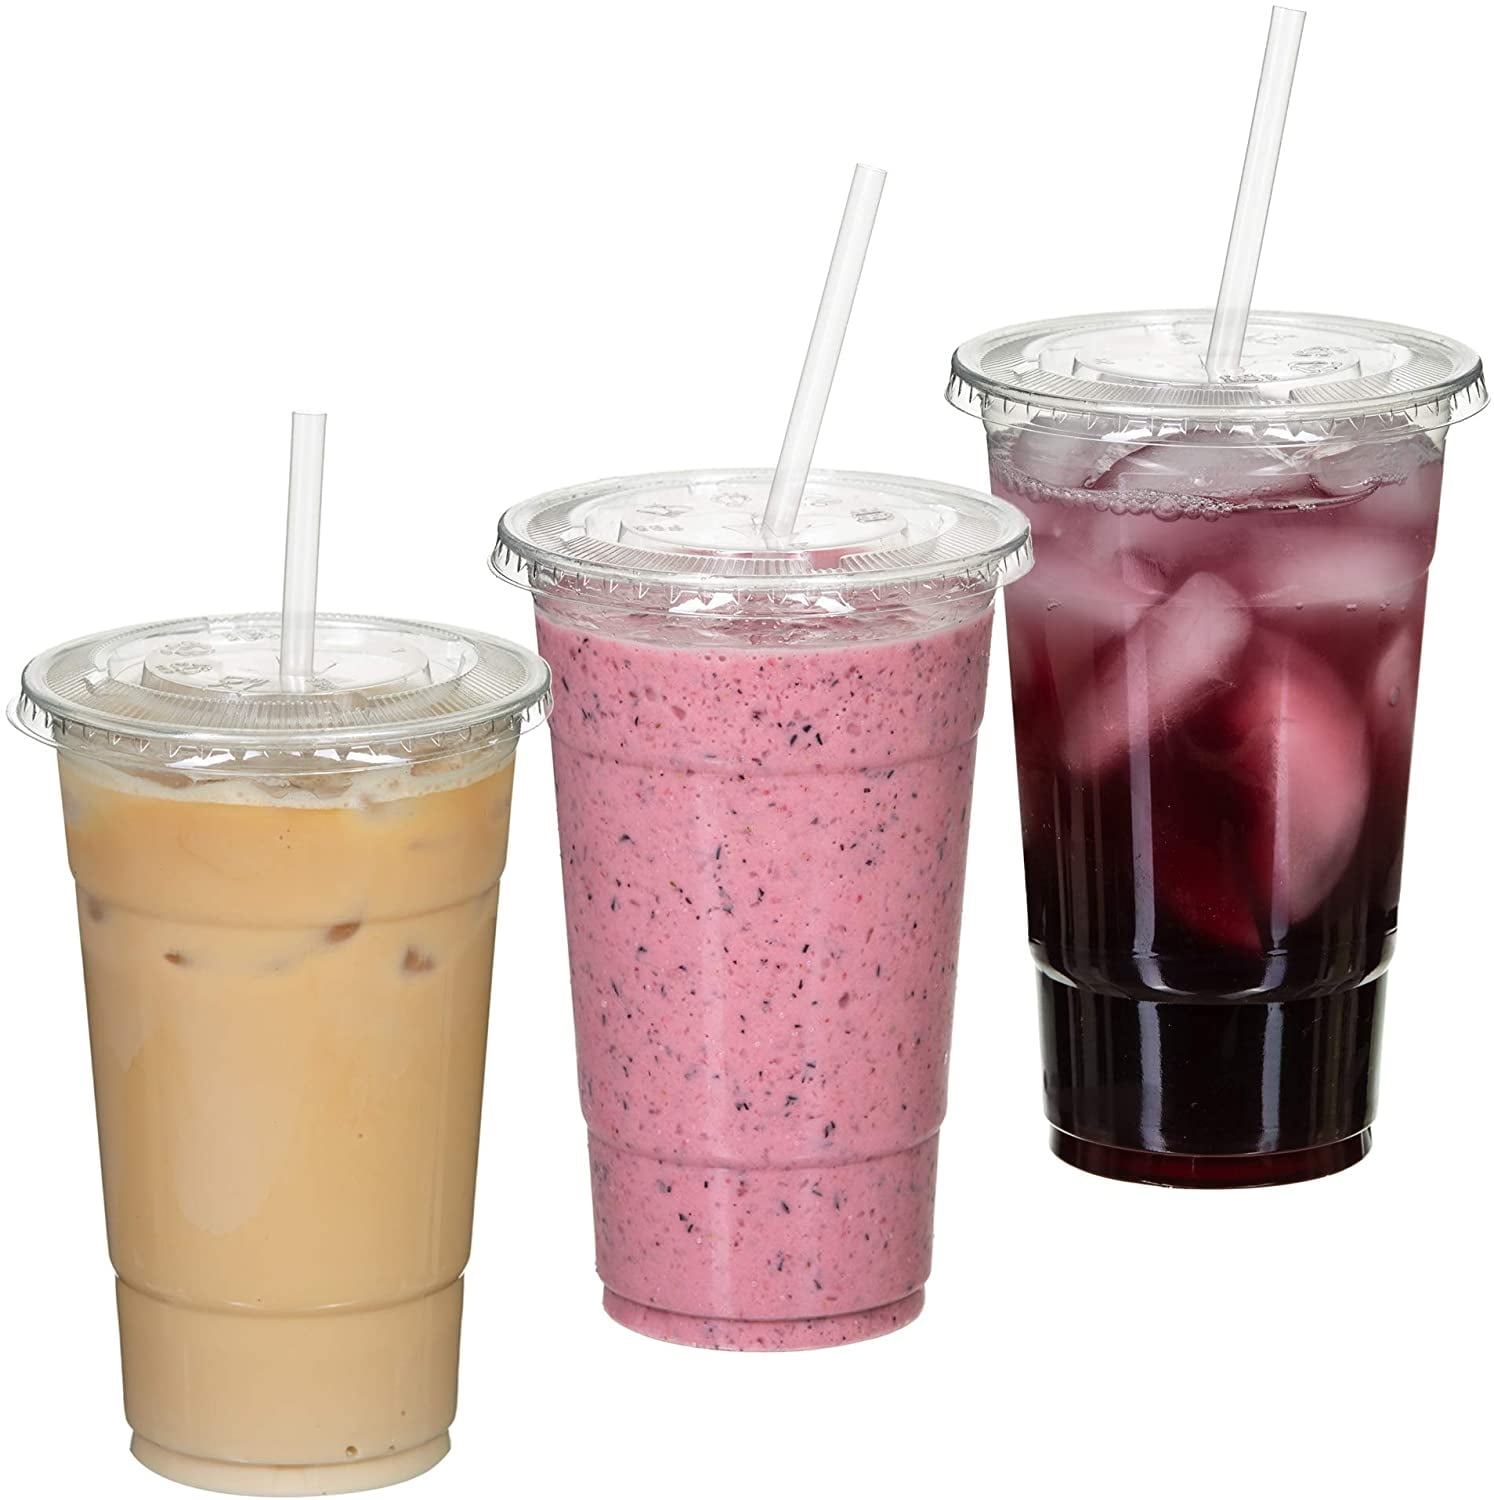 Stack Man 16 oz. Clear Cups with Strawless Sip-Lids, [50 Sets] PET